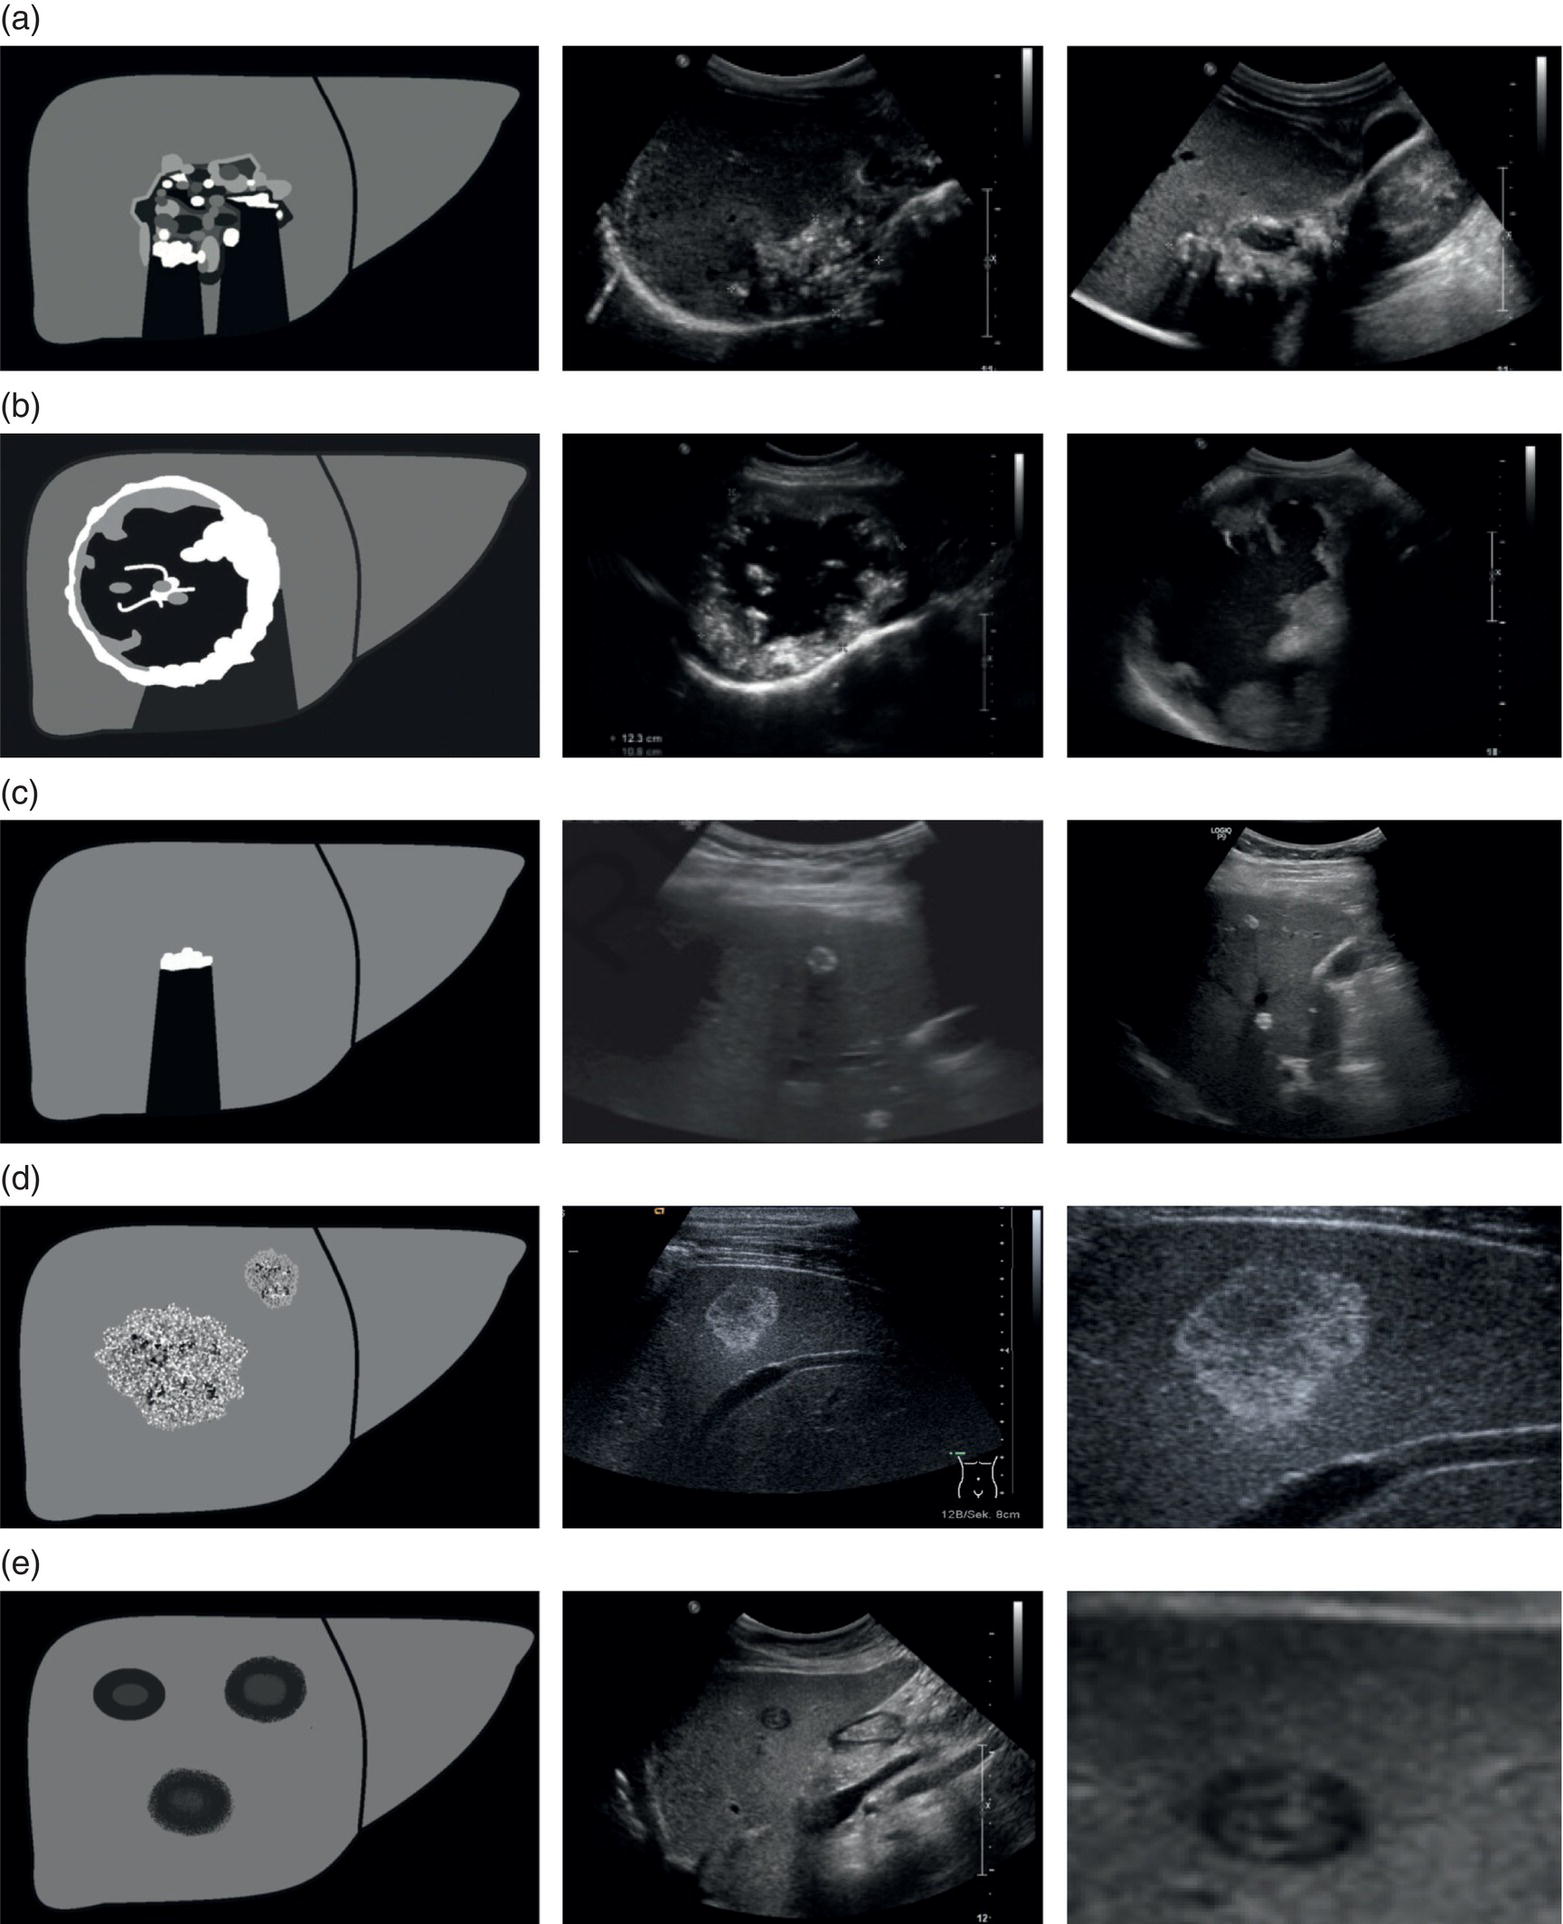 Five sonographic patterns of different ultrasound images. a. Hailstorm. b. pseudocystic. c. ossification. d. hemangioma. e. metastais. It contains three columns. The first column depicts the five sonographic patterns, and the second and the third column contains their respective ultrasound images.